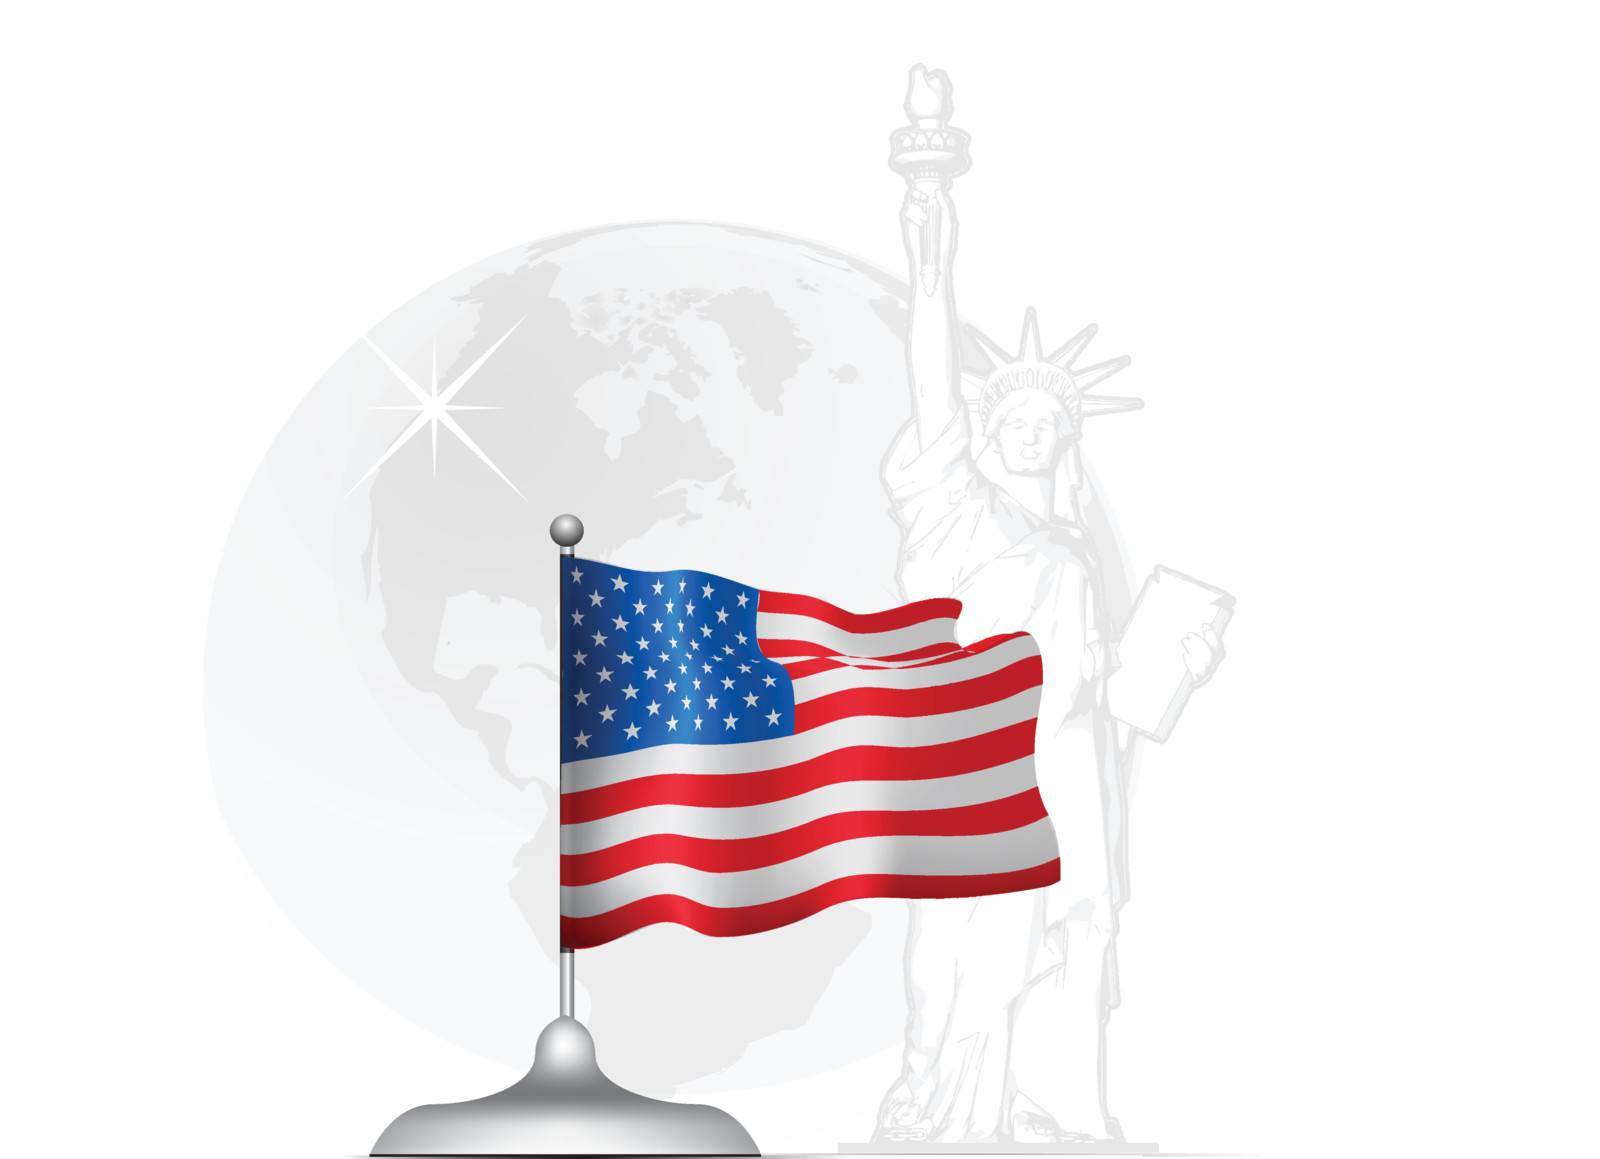 American flag on the stand at the background of the statue of liberty and the globe with a map of America